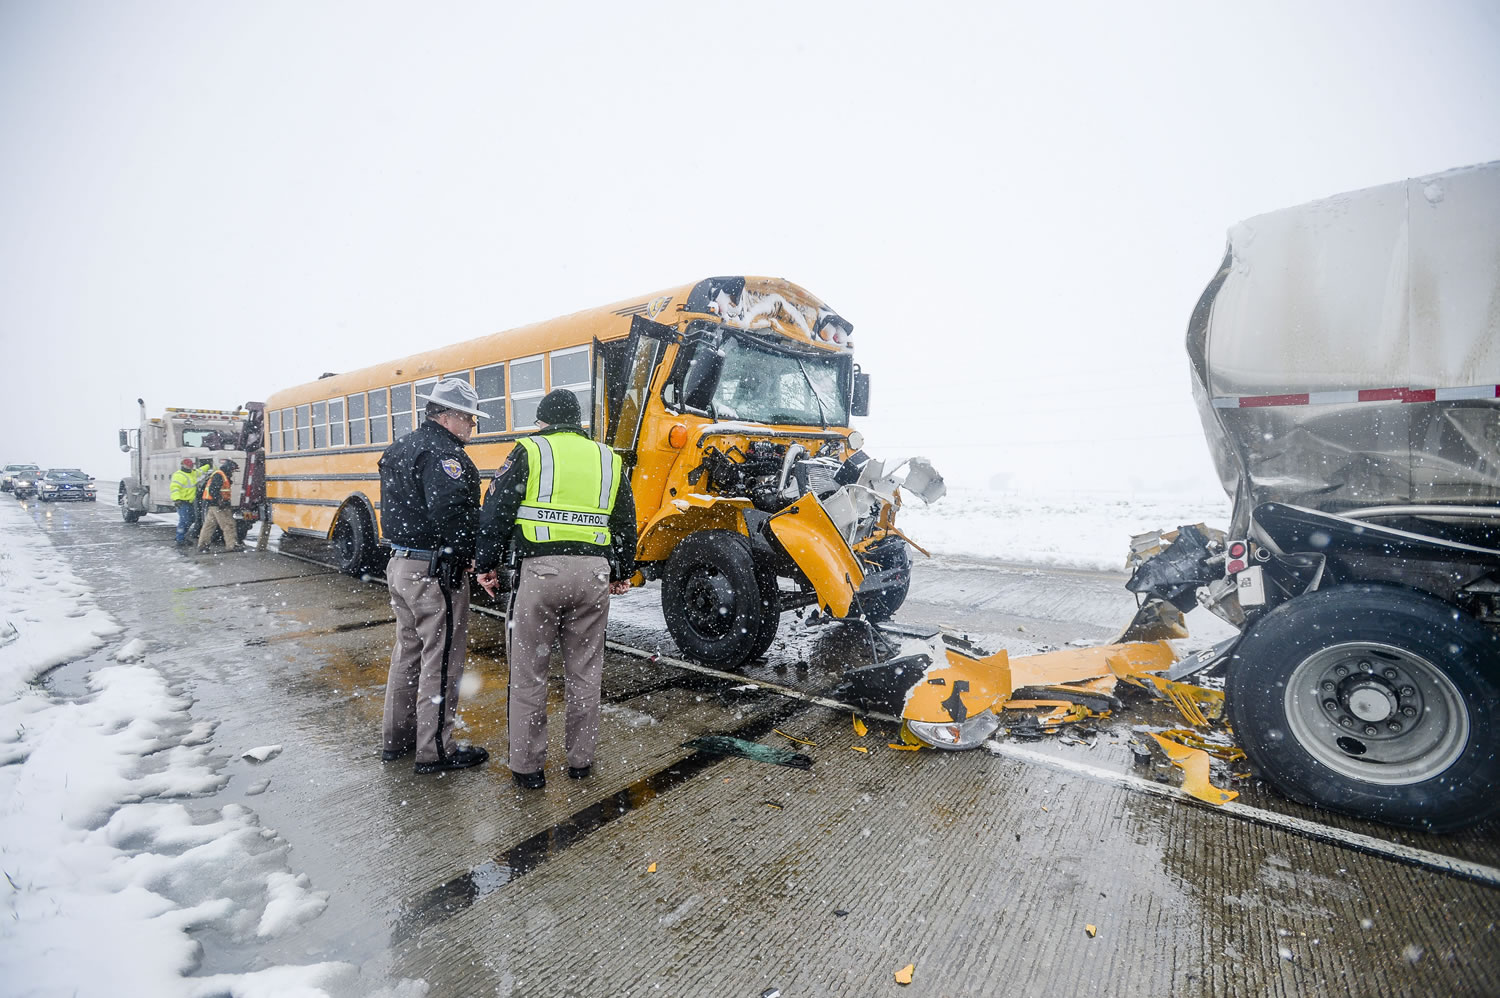 Crews clean up a school bus and semitrailer collision on northbound I-25 on Sunday in Fort Collins, Colo.